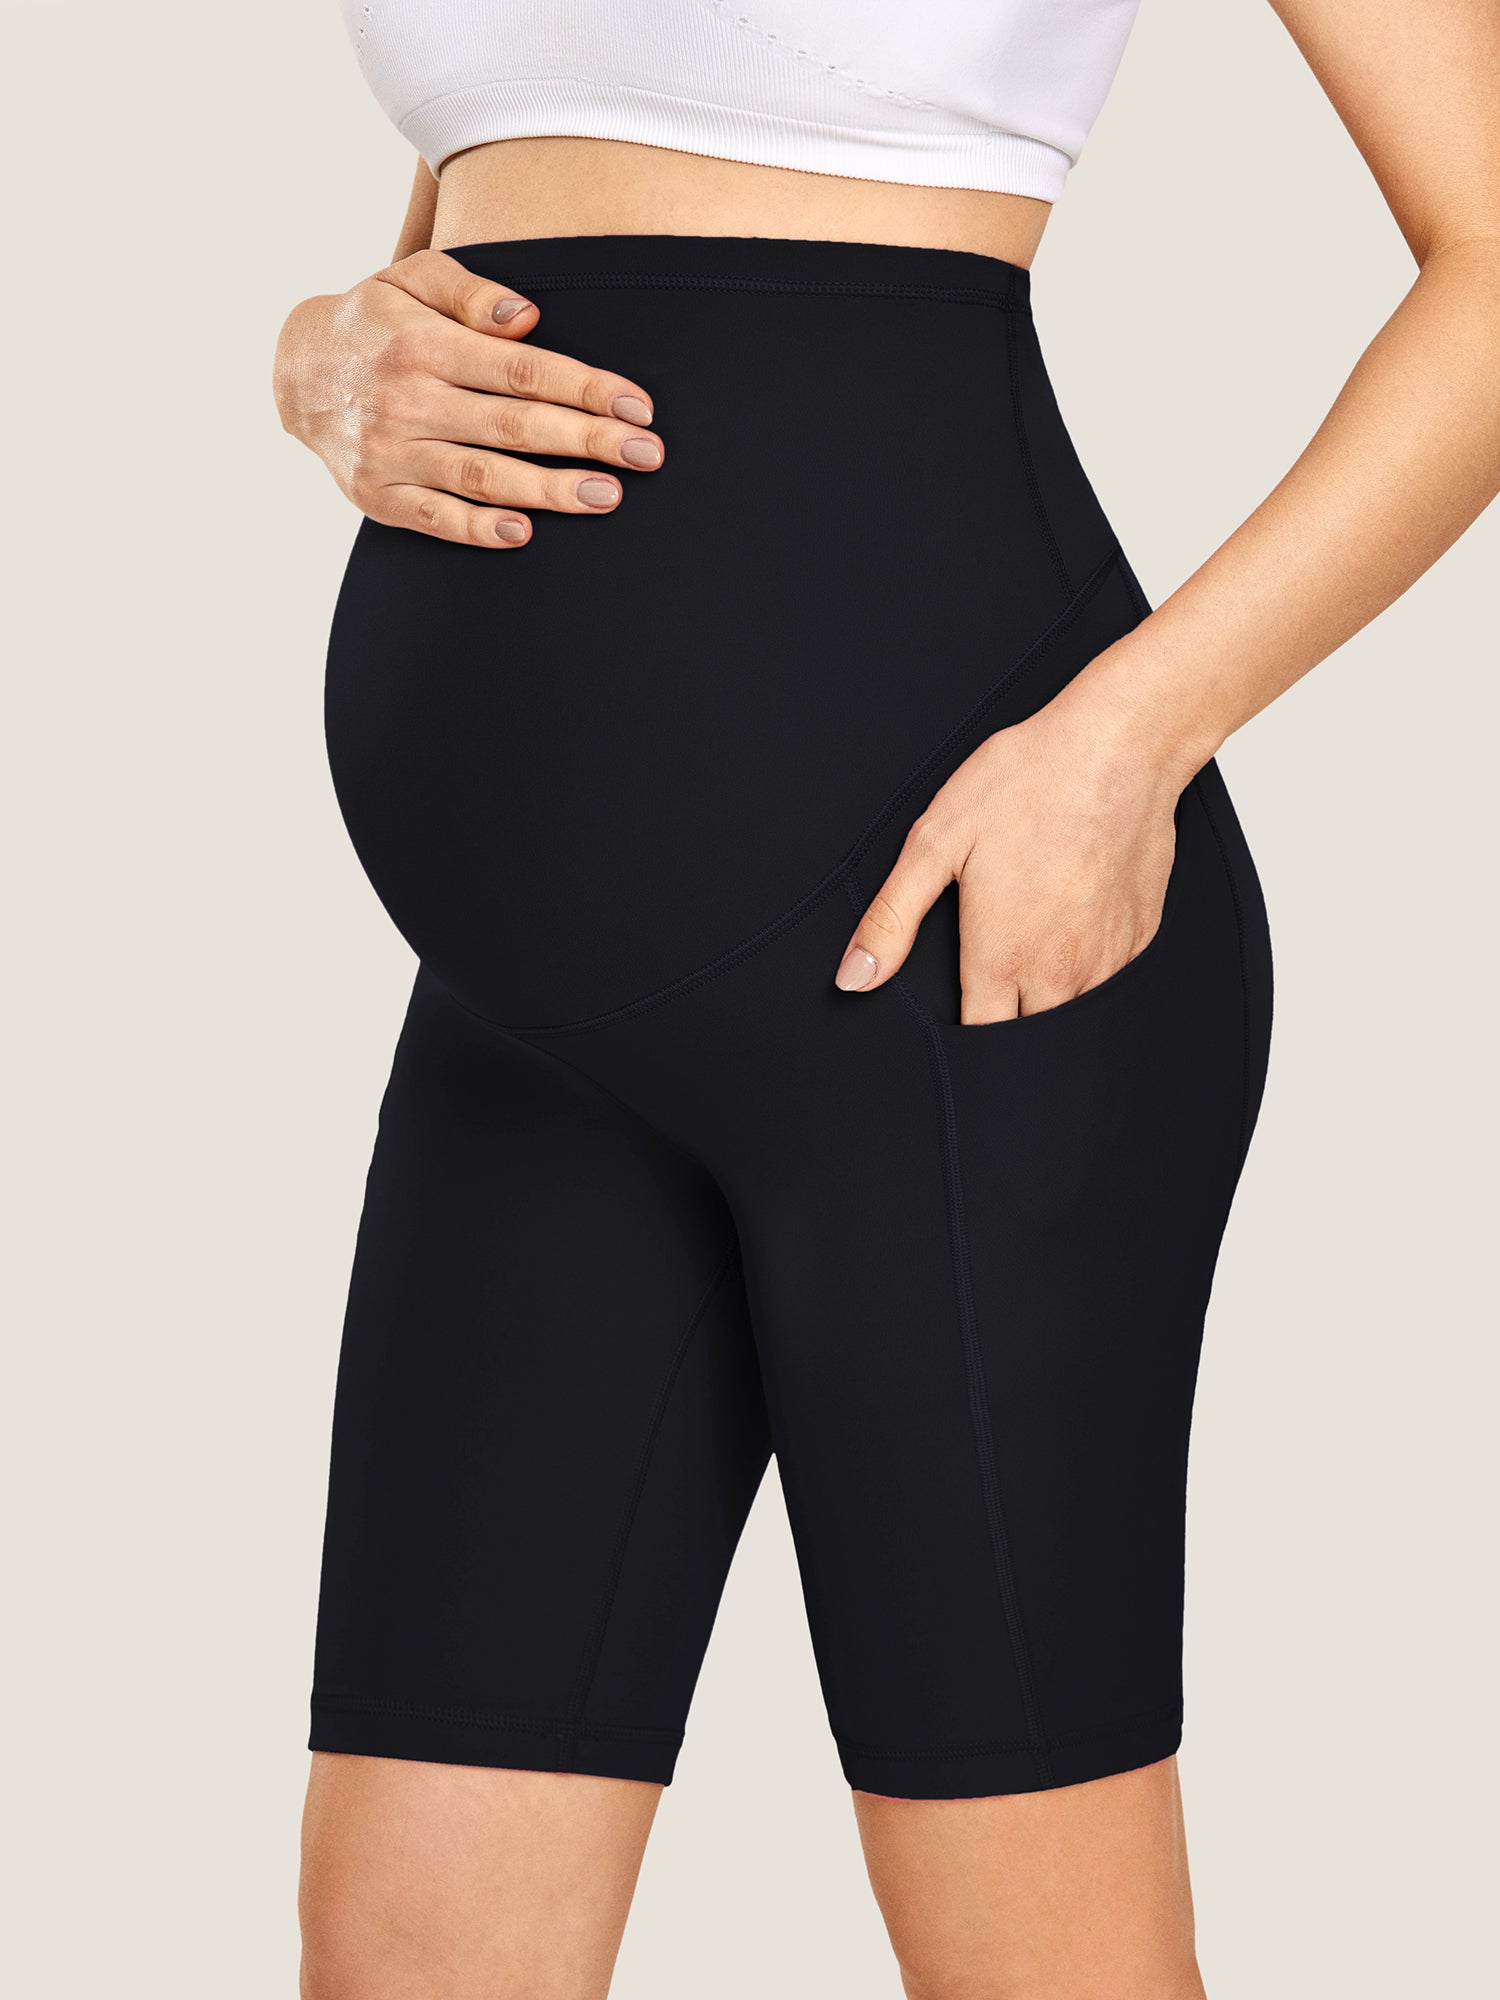 Stretch With You Maternity Bike Short Black